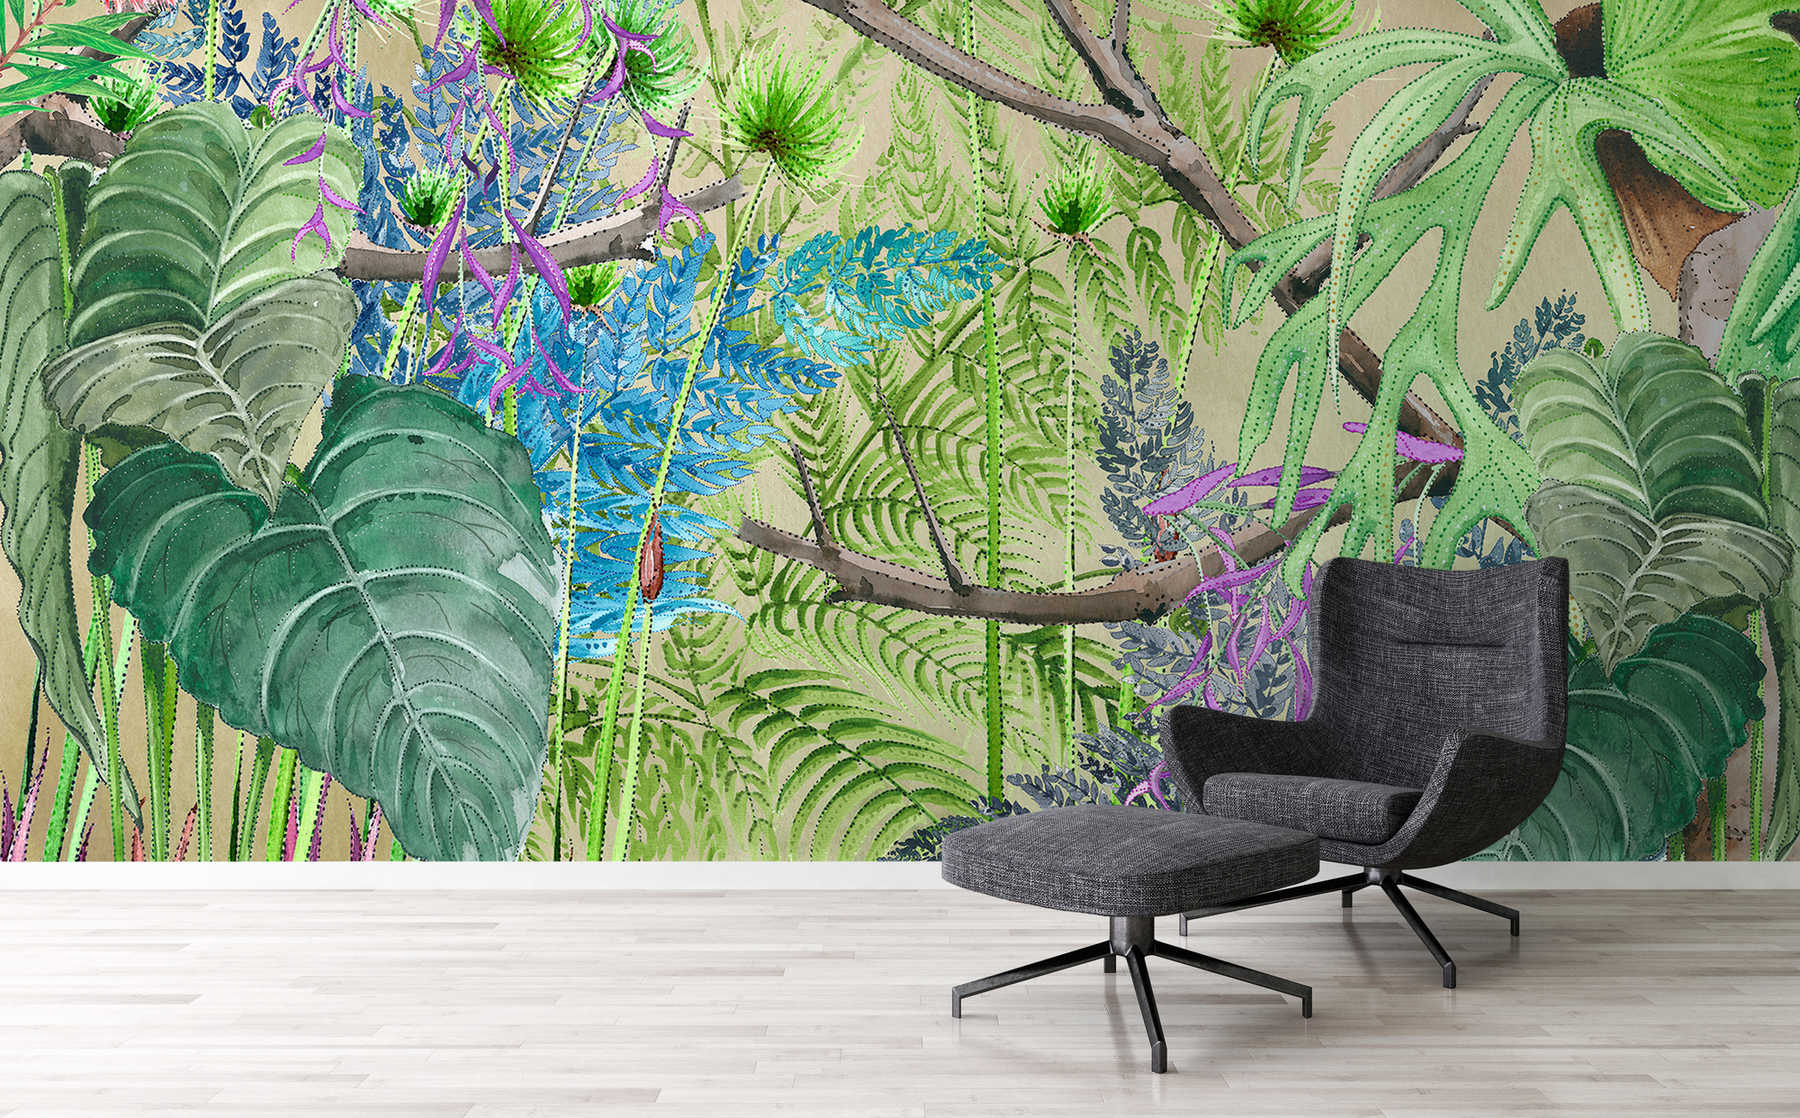             Jungle mural with flowers in blue and green on matte smooth vinyl
        